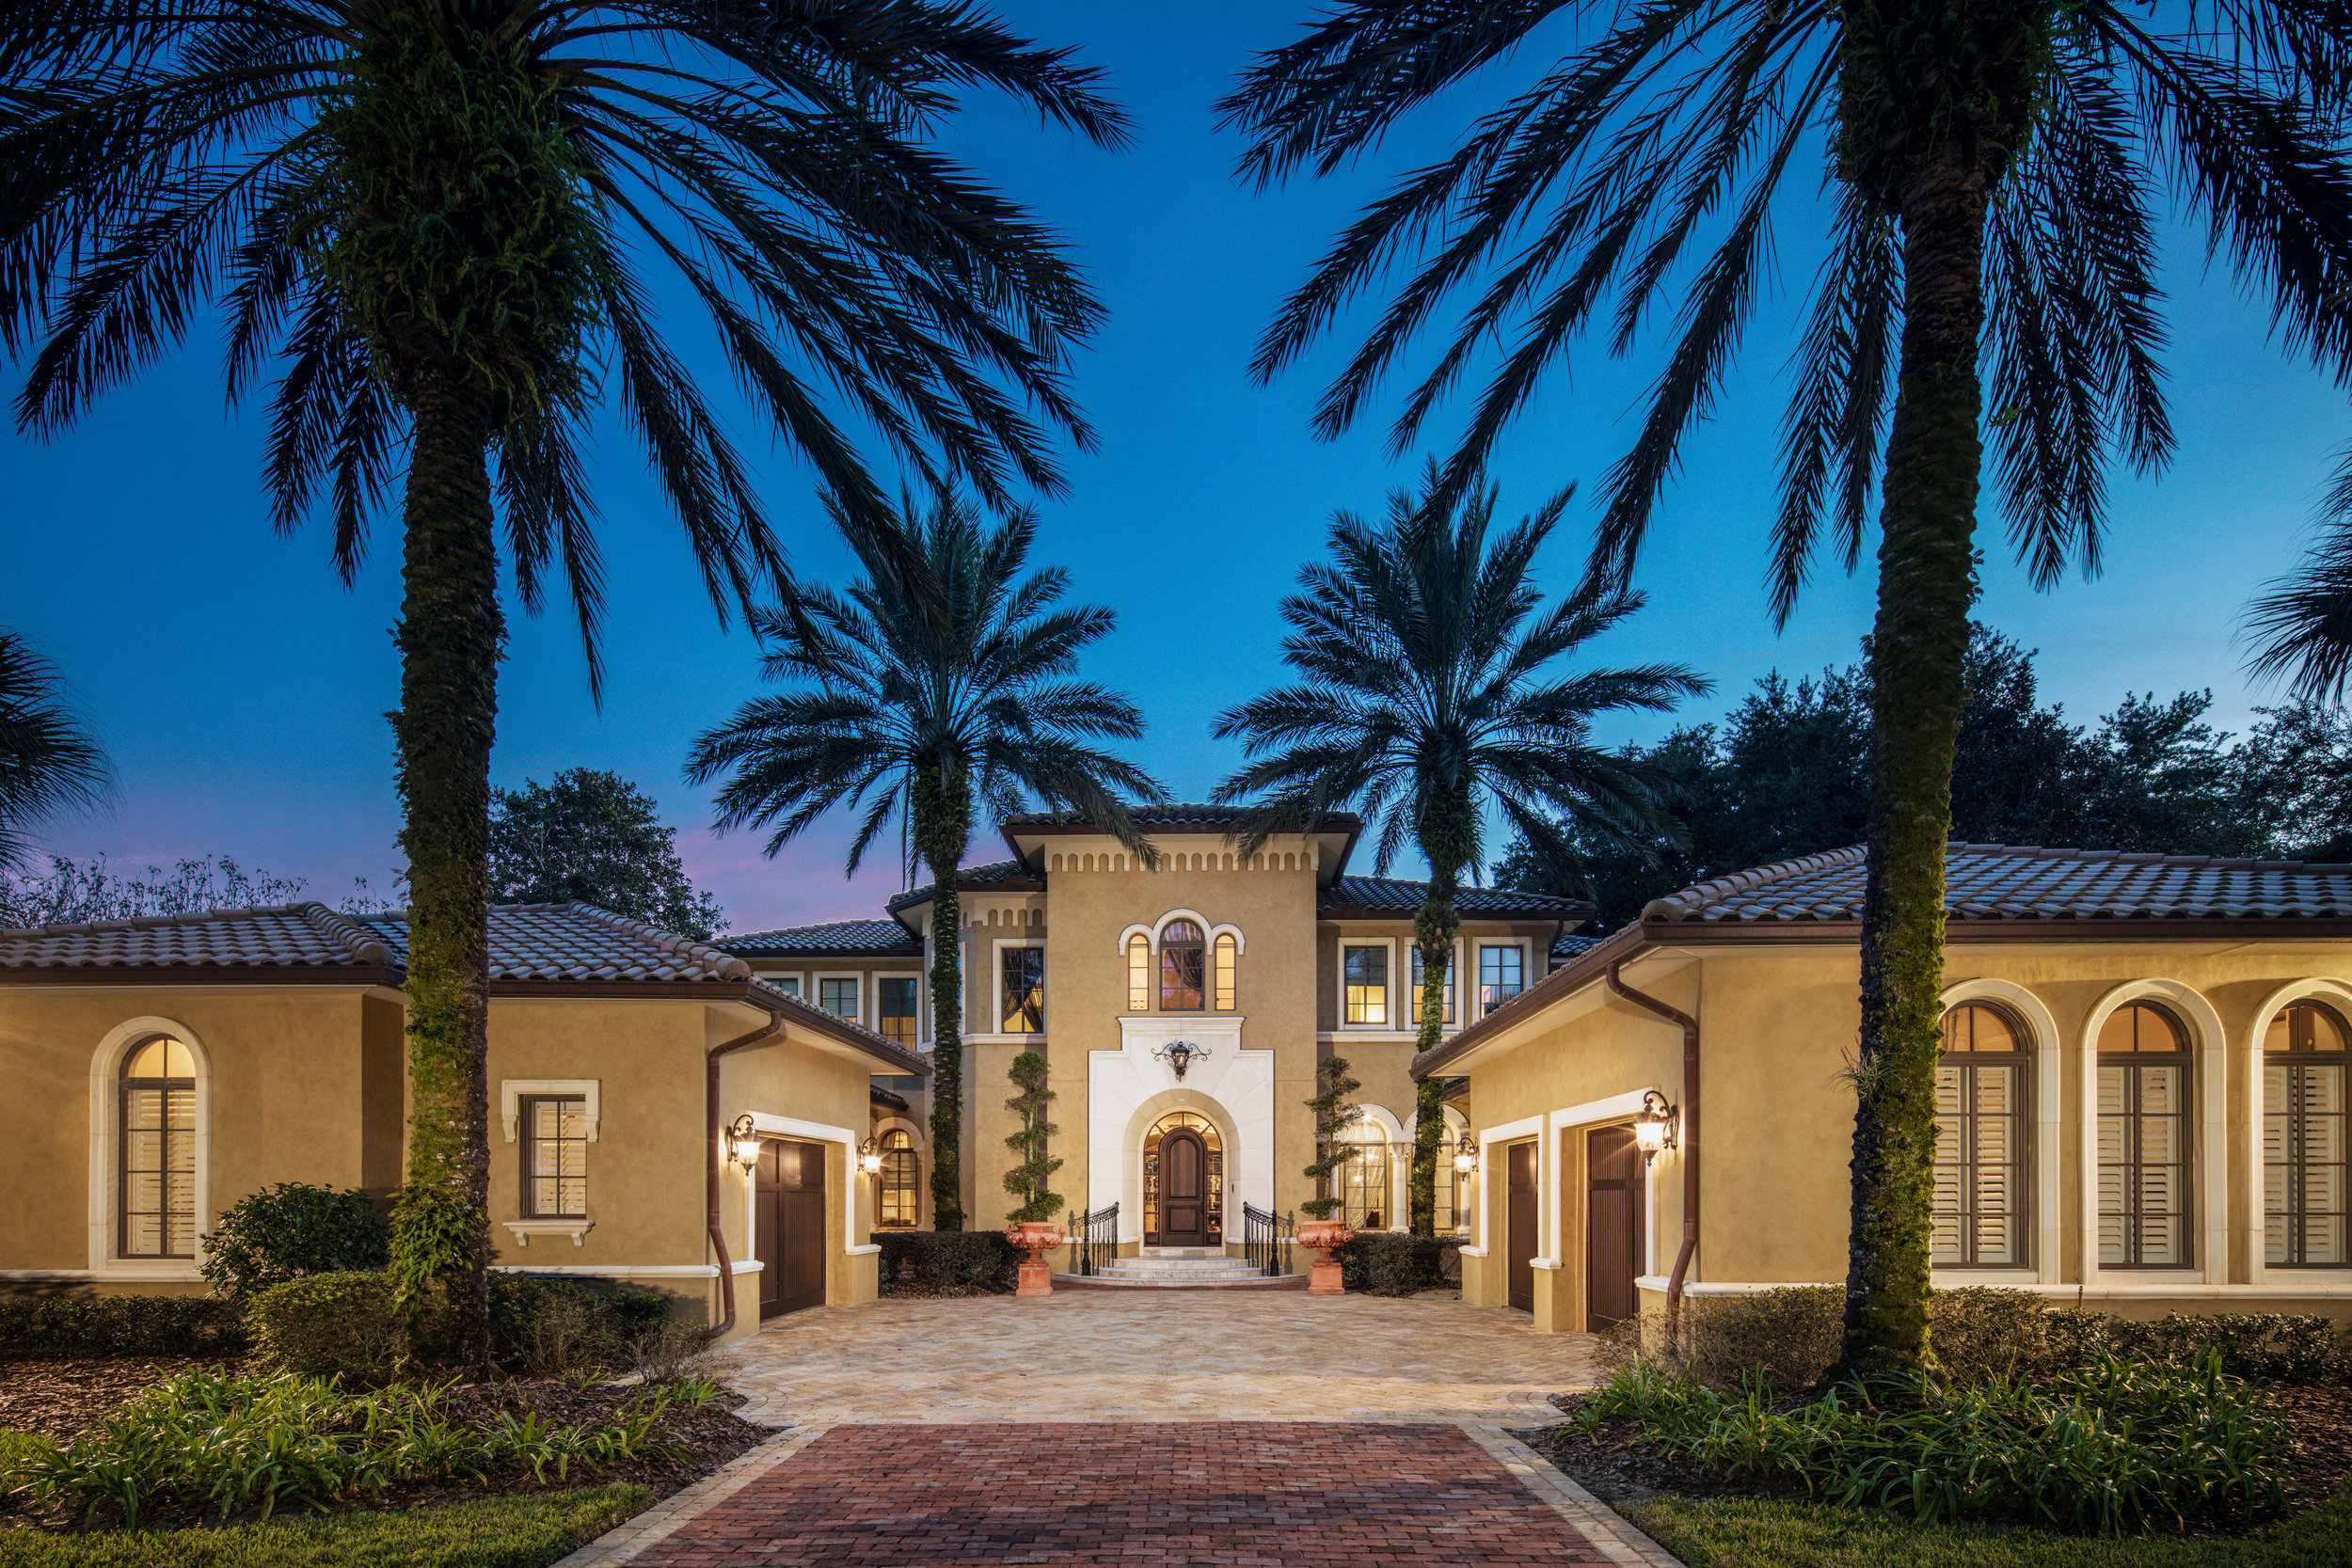 Isleworth mansion with yellow lighting and blue sky with palm trees